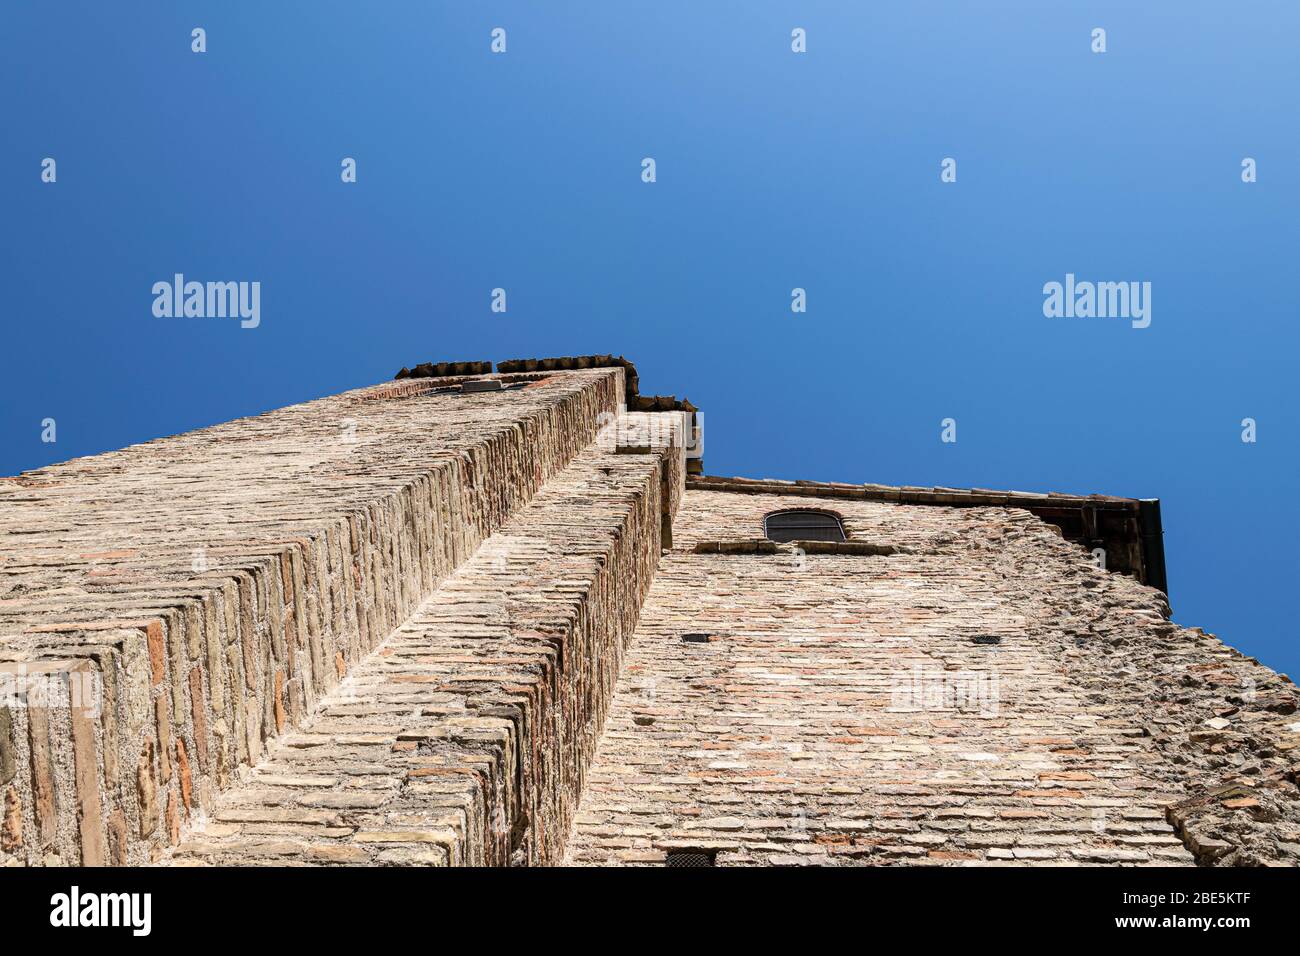 Looking up at the brick facade of the Palace of Theodoric in Ravenna, Italy Stock Photo